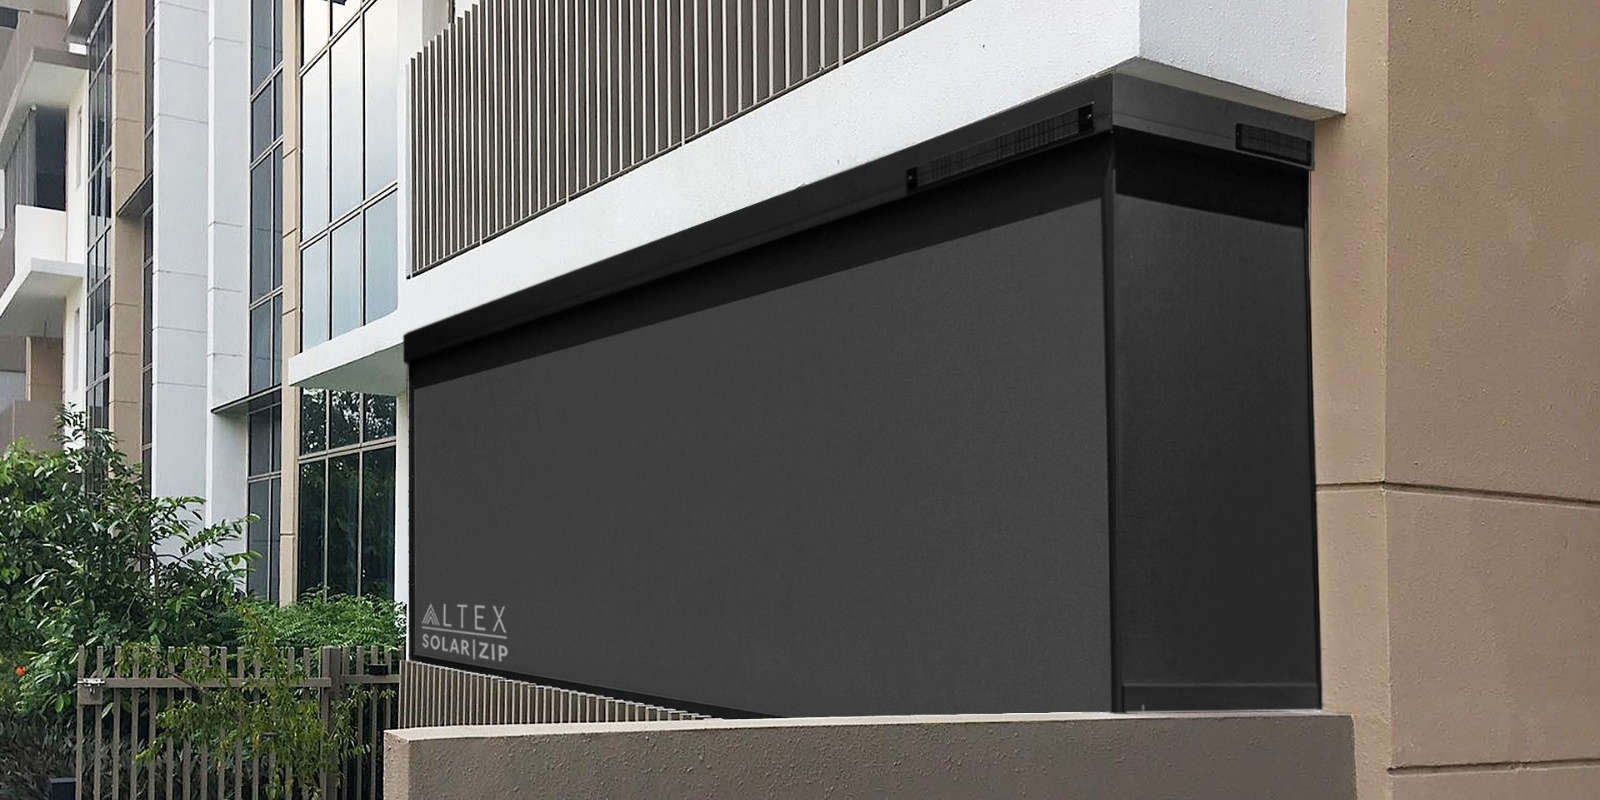 ALTEX Launches New Solar-Powered ZIP blinds to Reduce Electricity Bills and Carbon Footprint